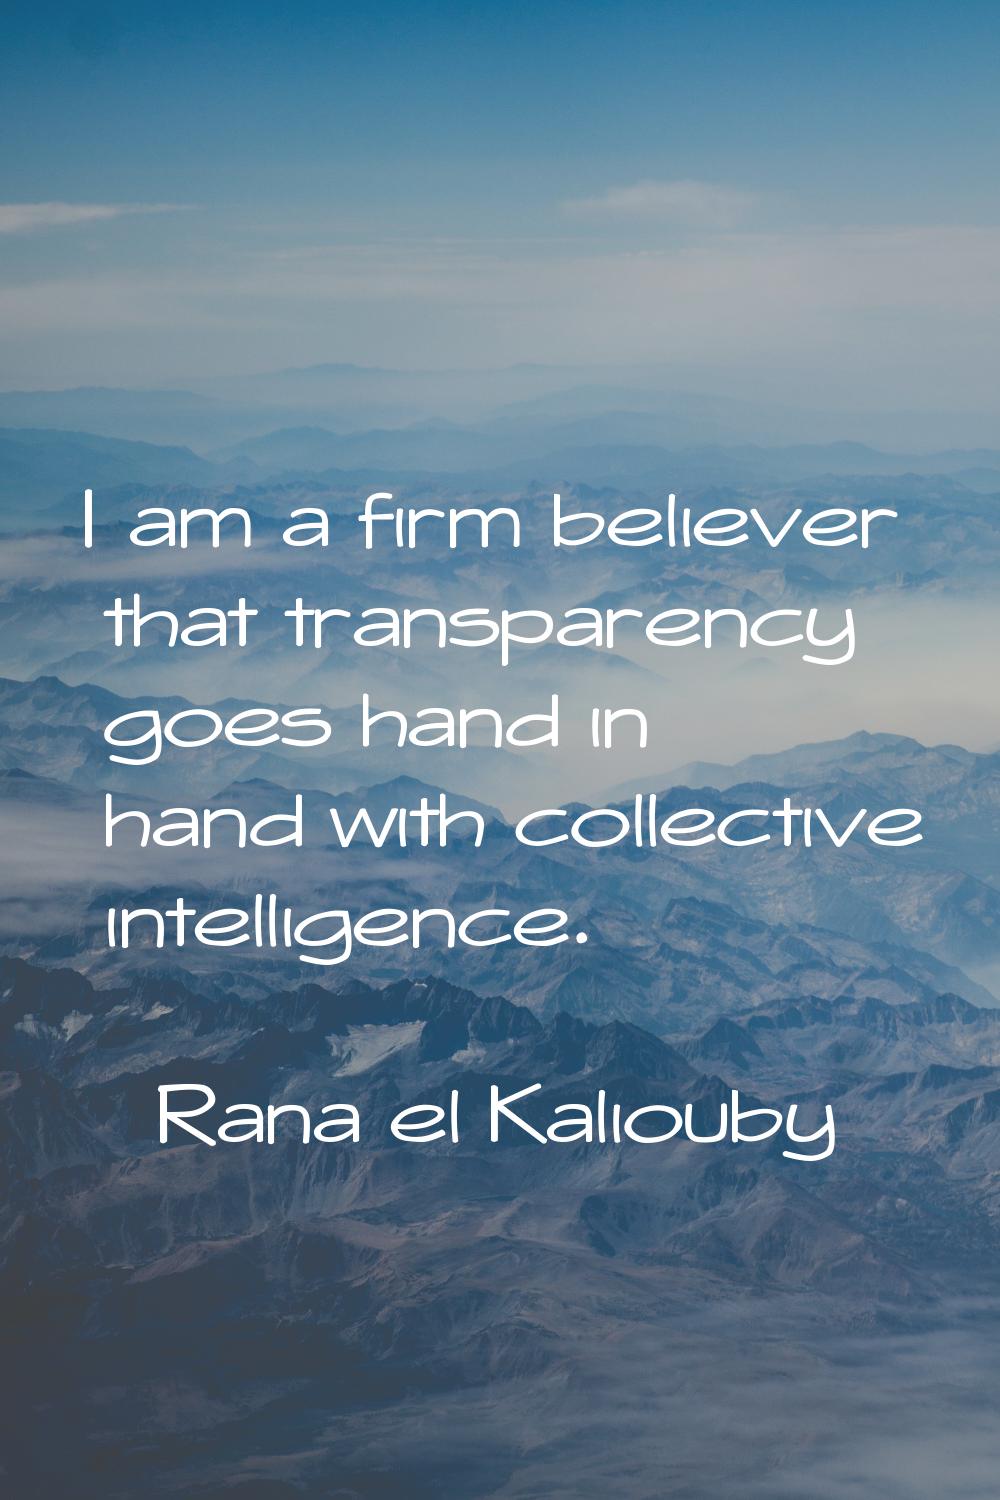 I am a firm believer that transparency goes hand in hand with collective intelligence.